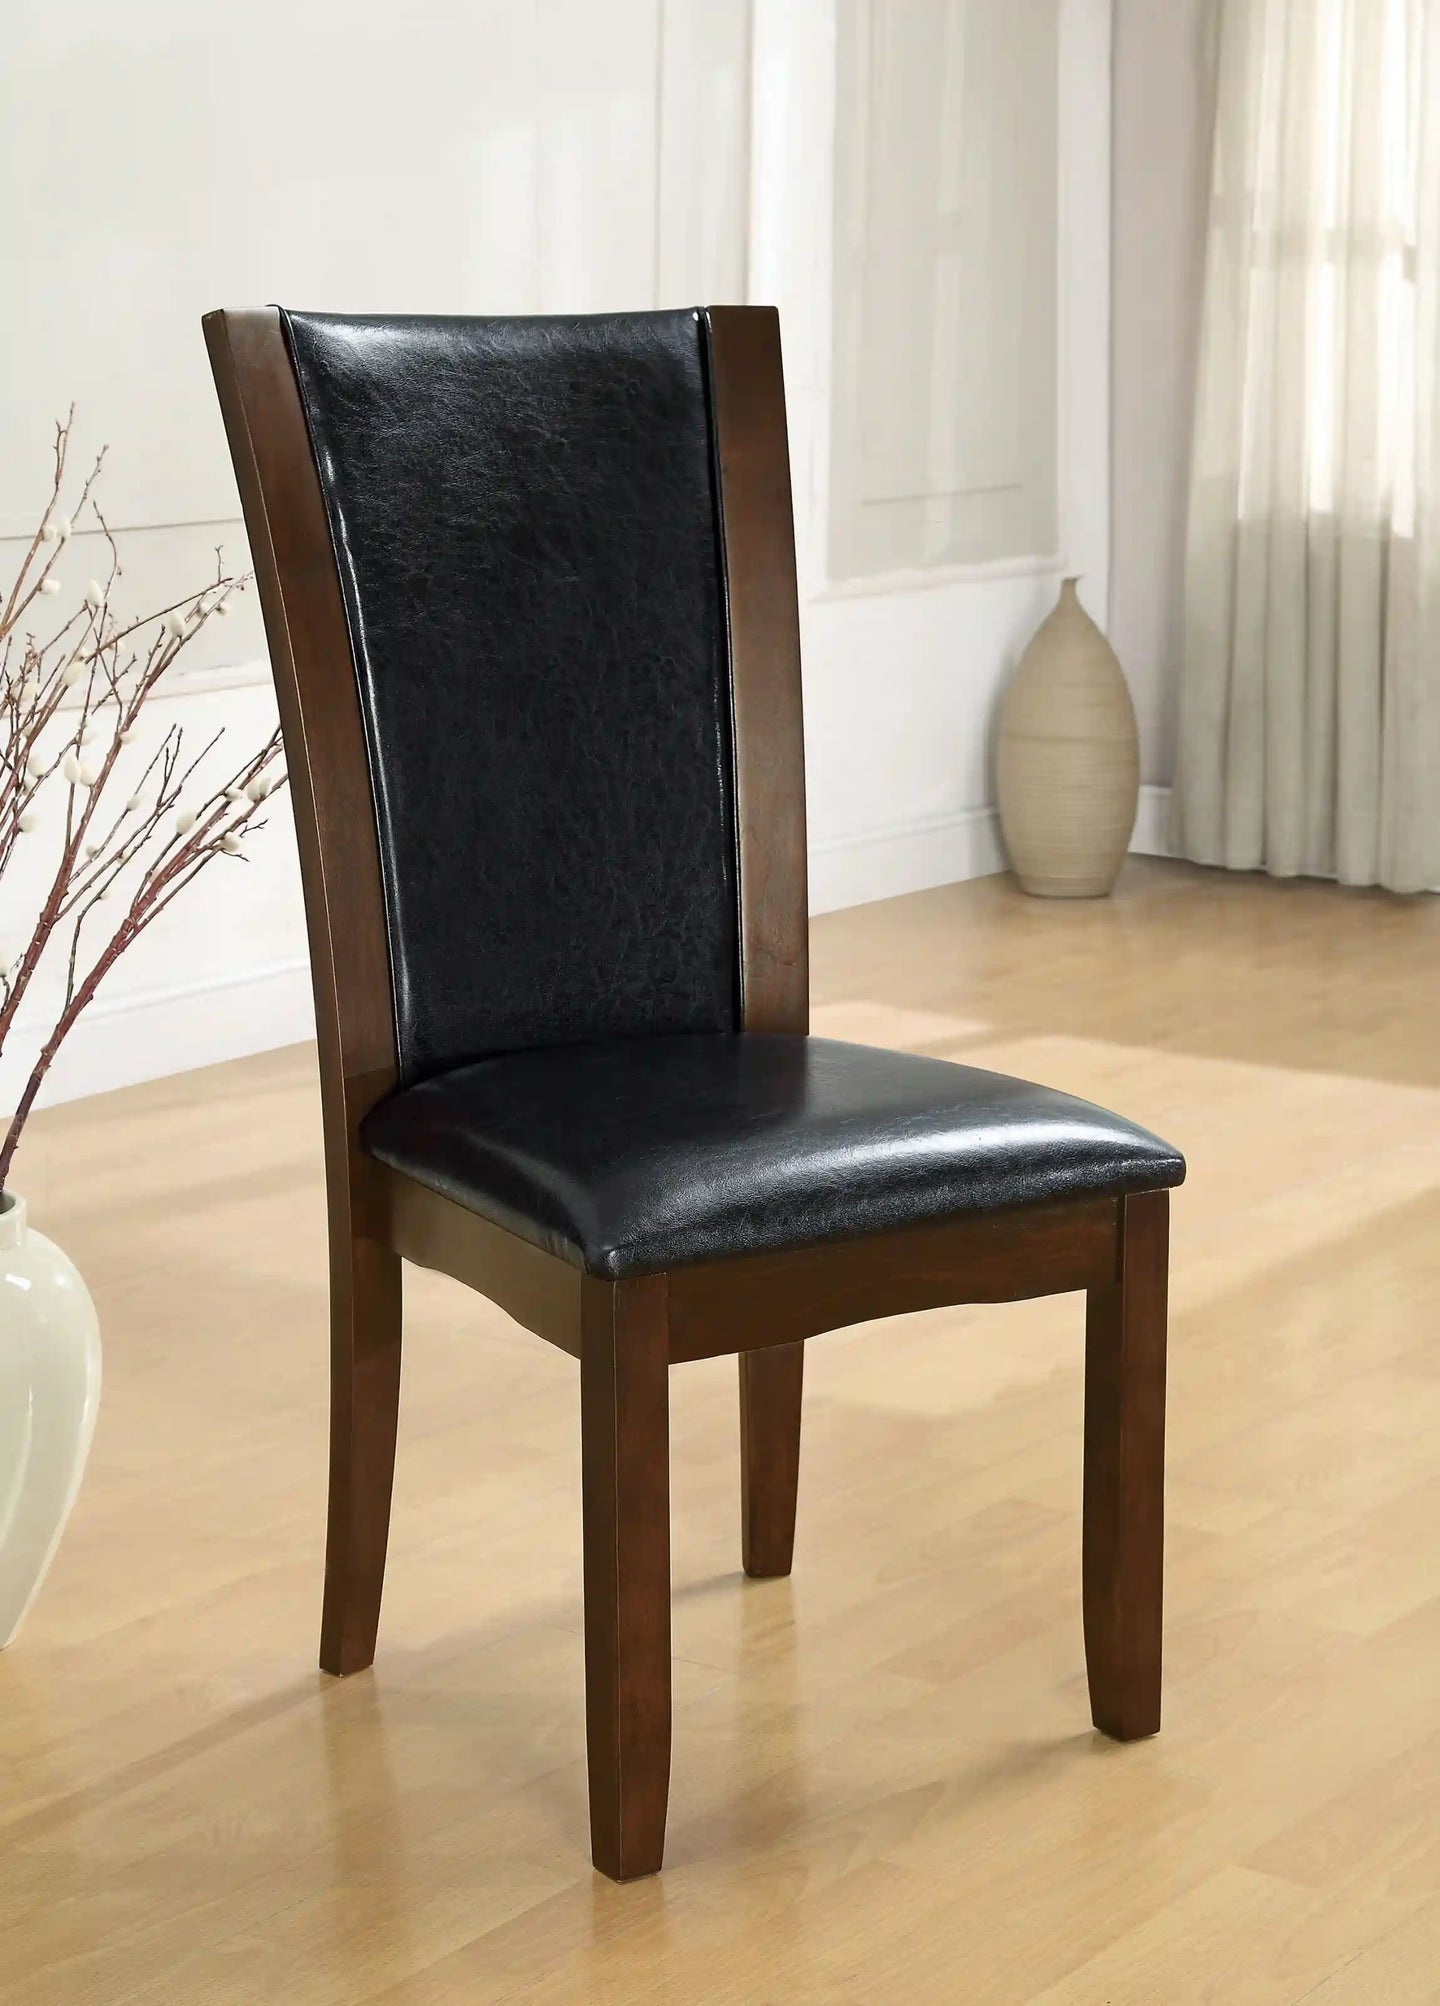 Furniture of America Aloise Contemporary Faux Leather Side Chairs in Brown Cherry (Set of 2) - IDF-3710SC